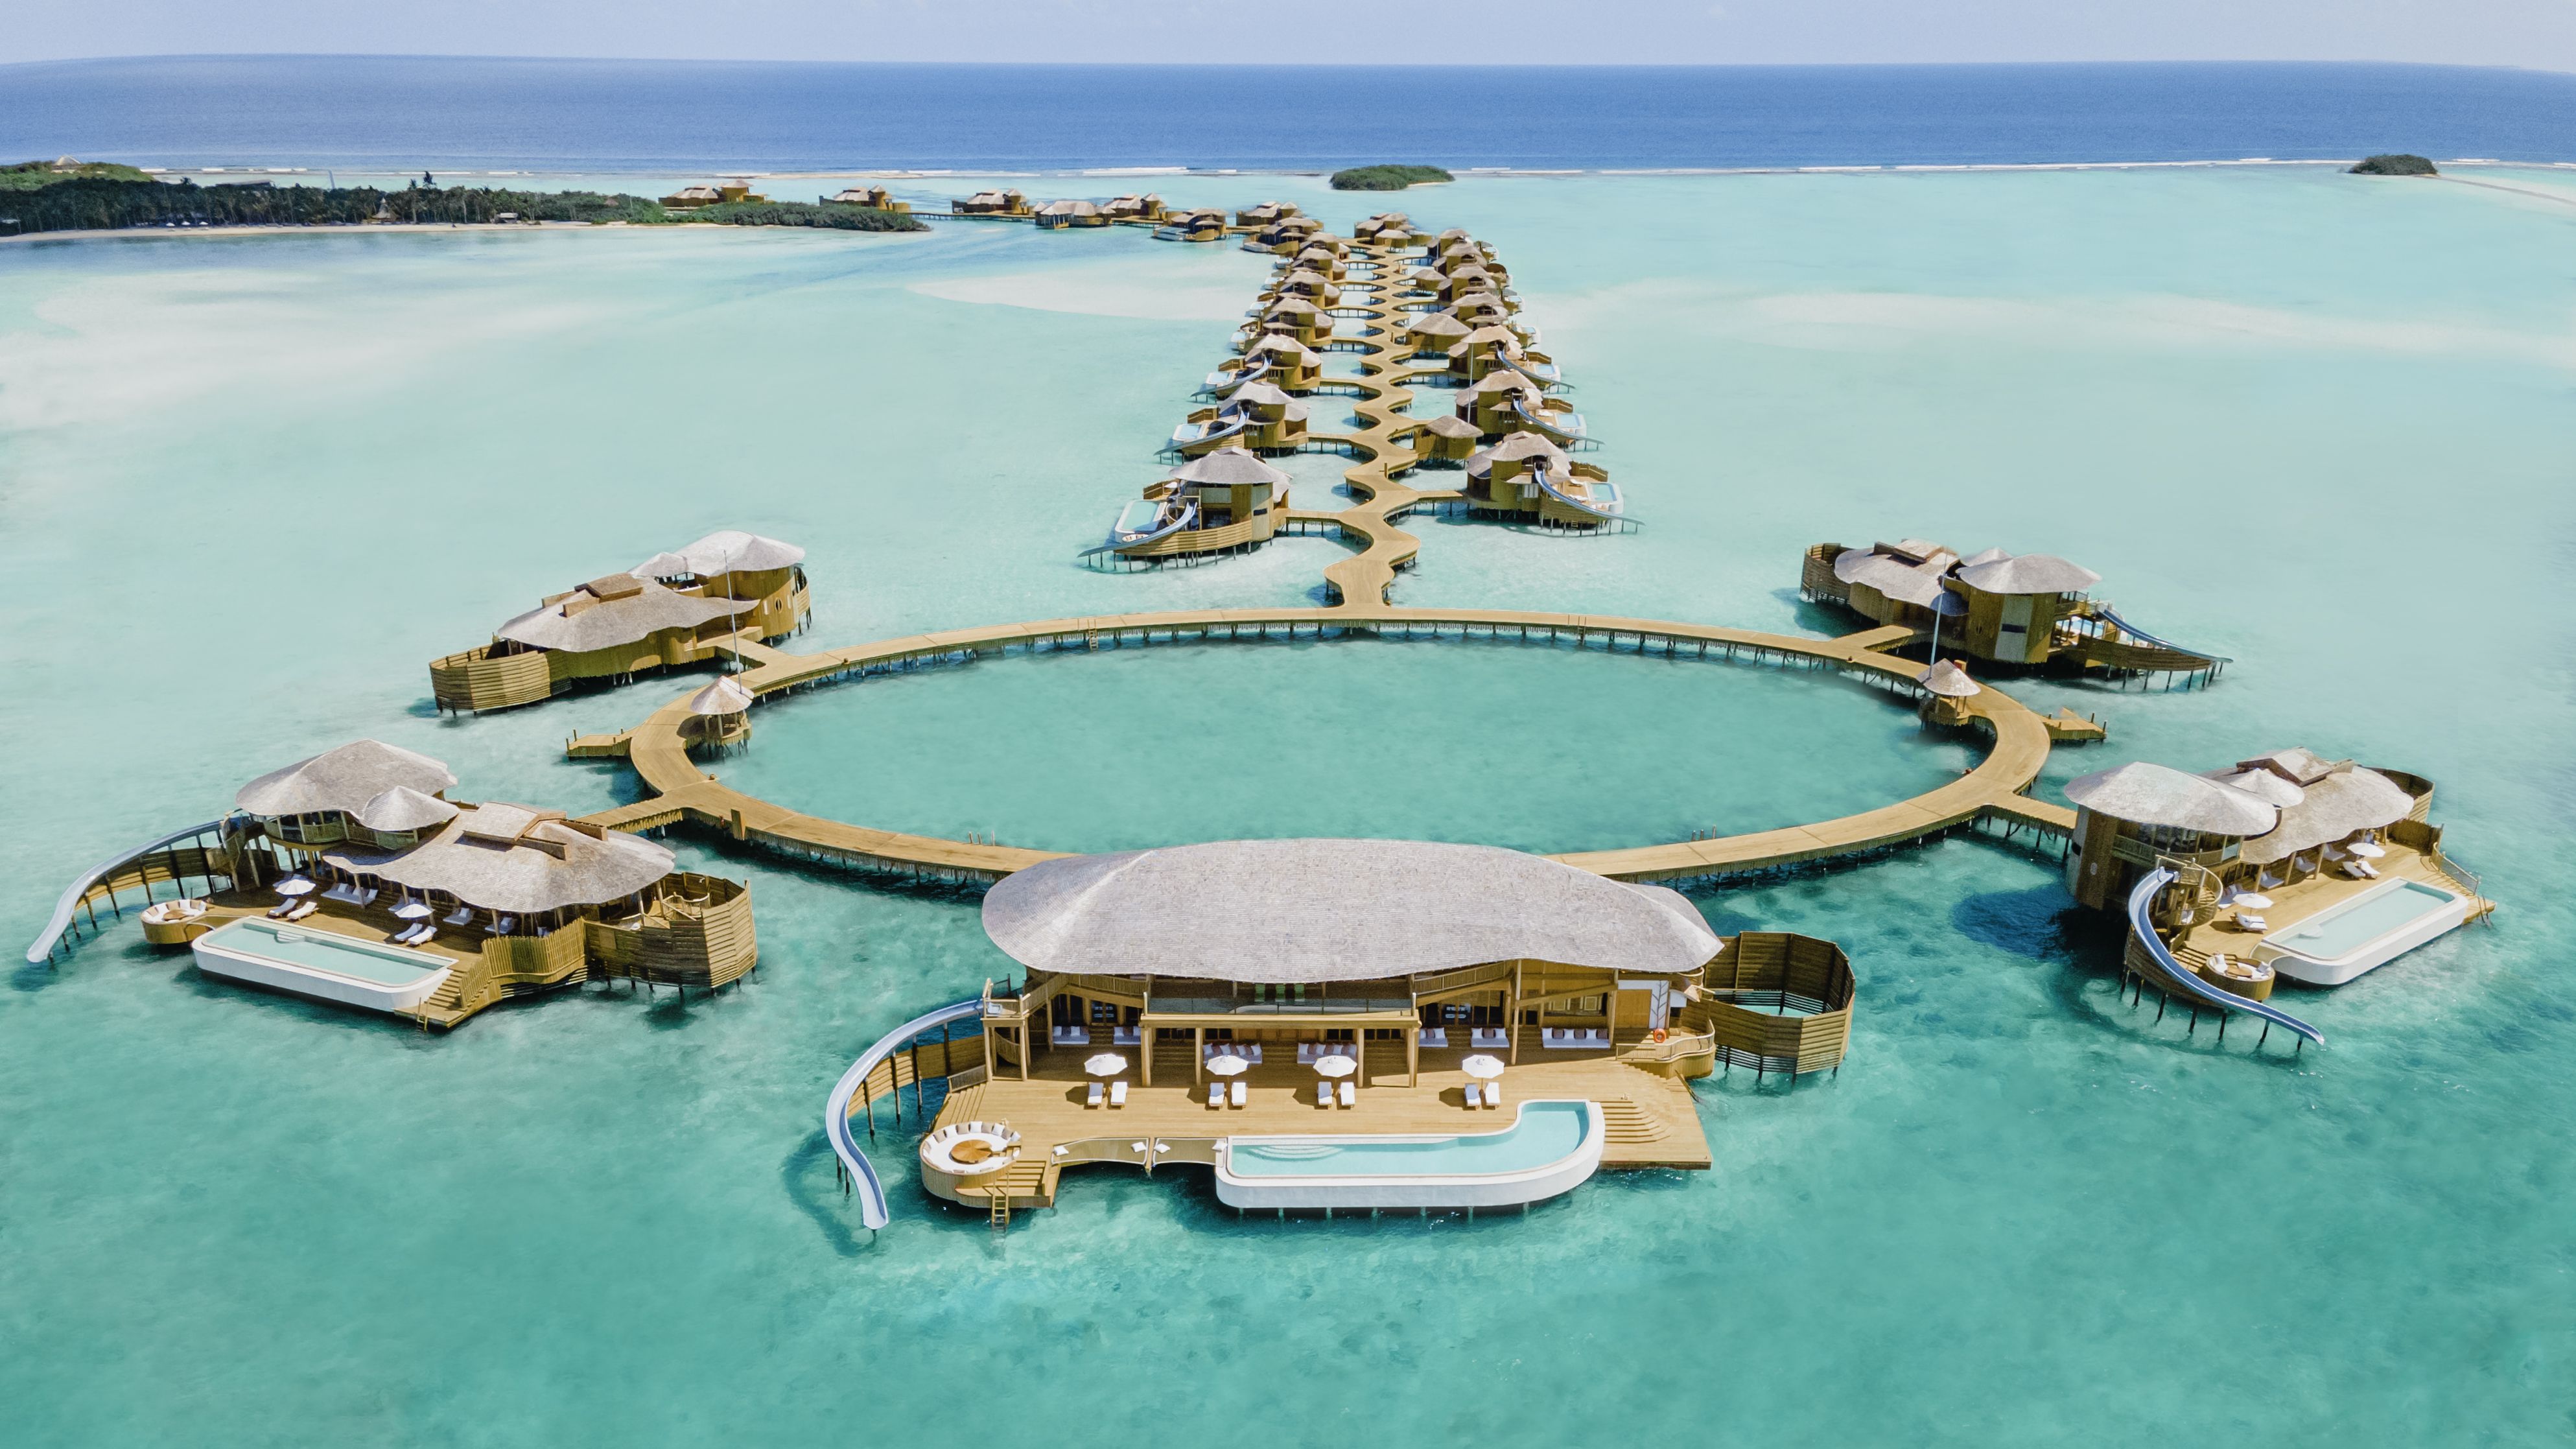 The Best Luxury All-Inclusive Resorts - Vacation Resorts to Visit